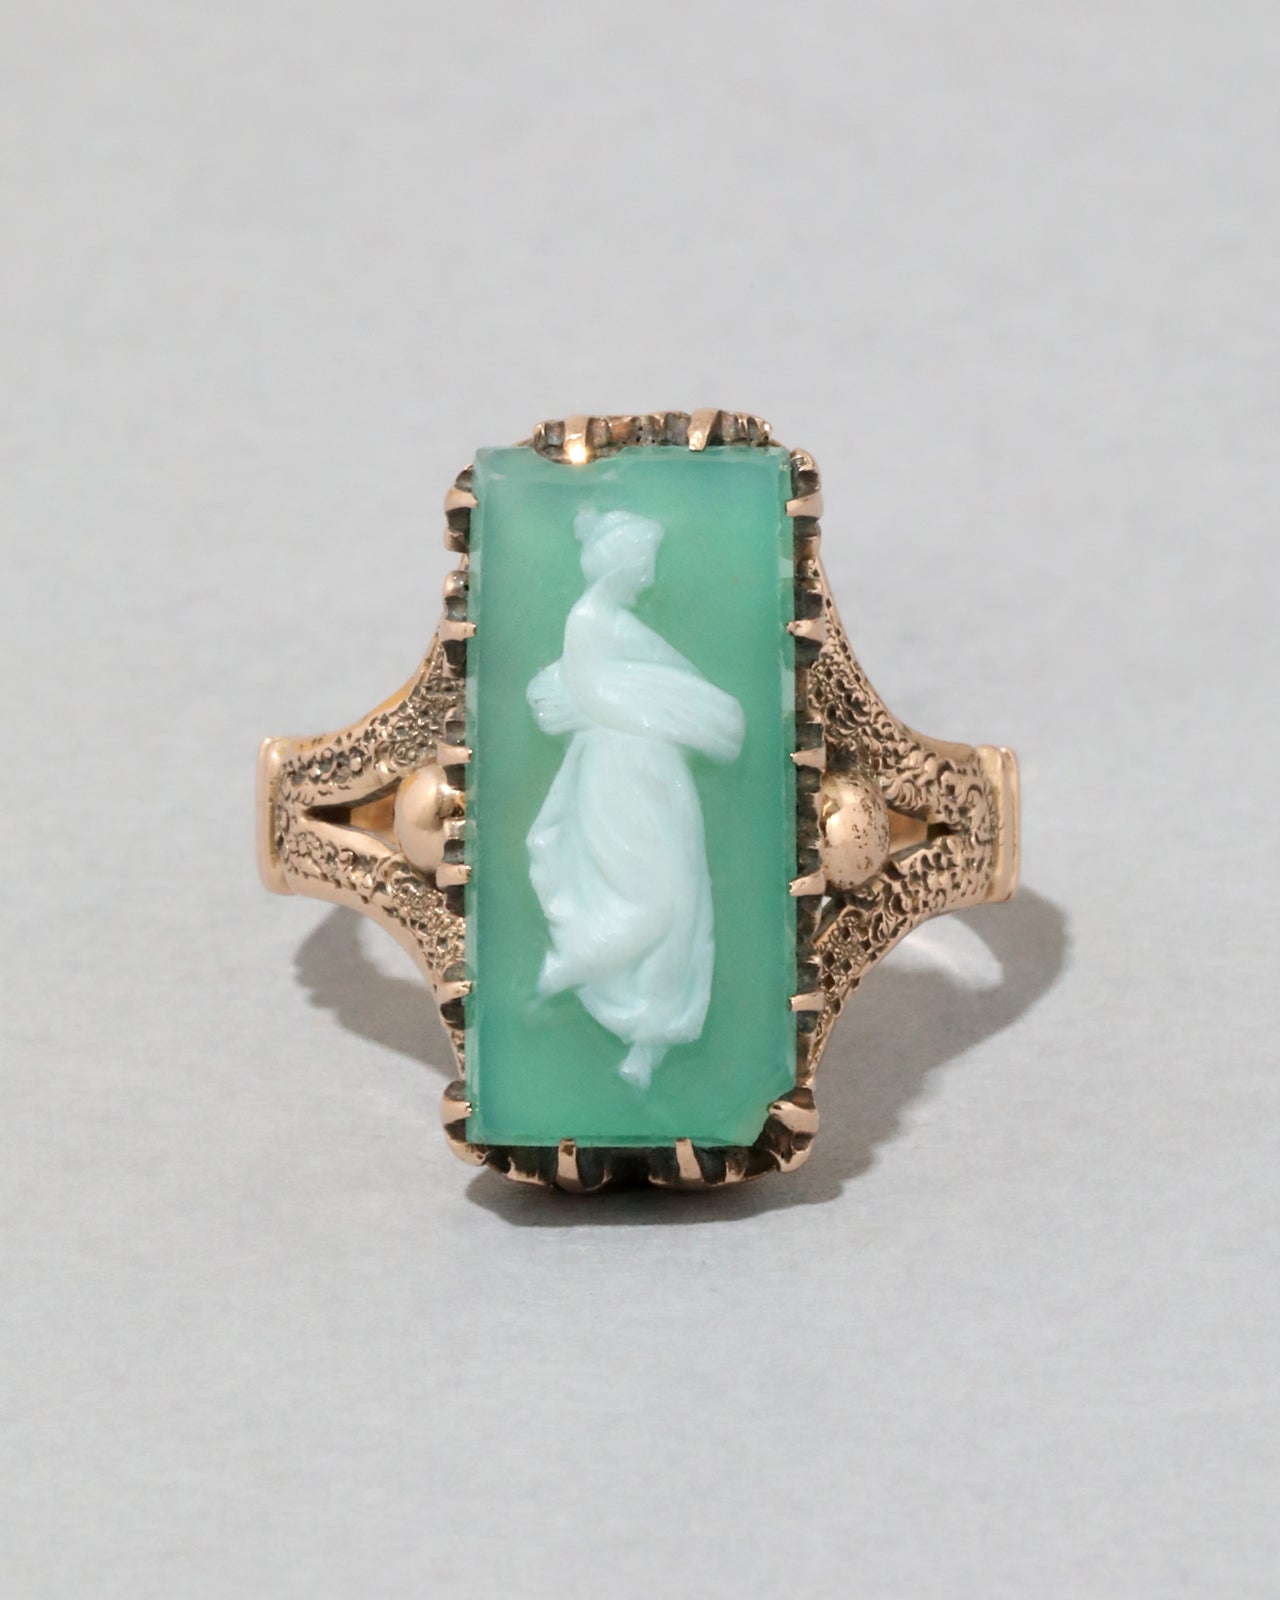 Antique Victorian 14k Gold Green & White Onyx Cameo Ring - Photo 2